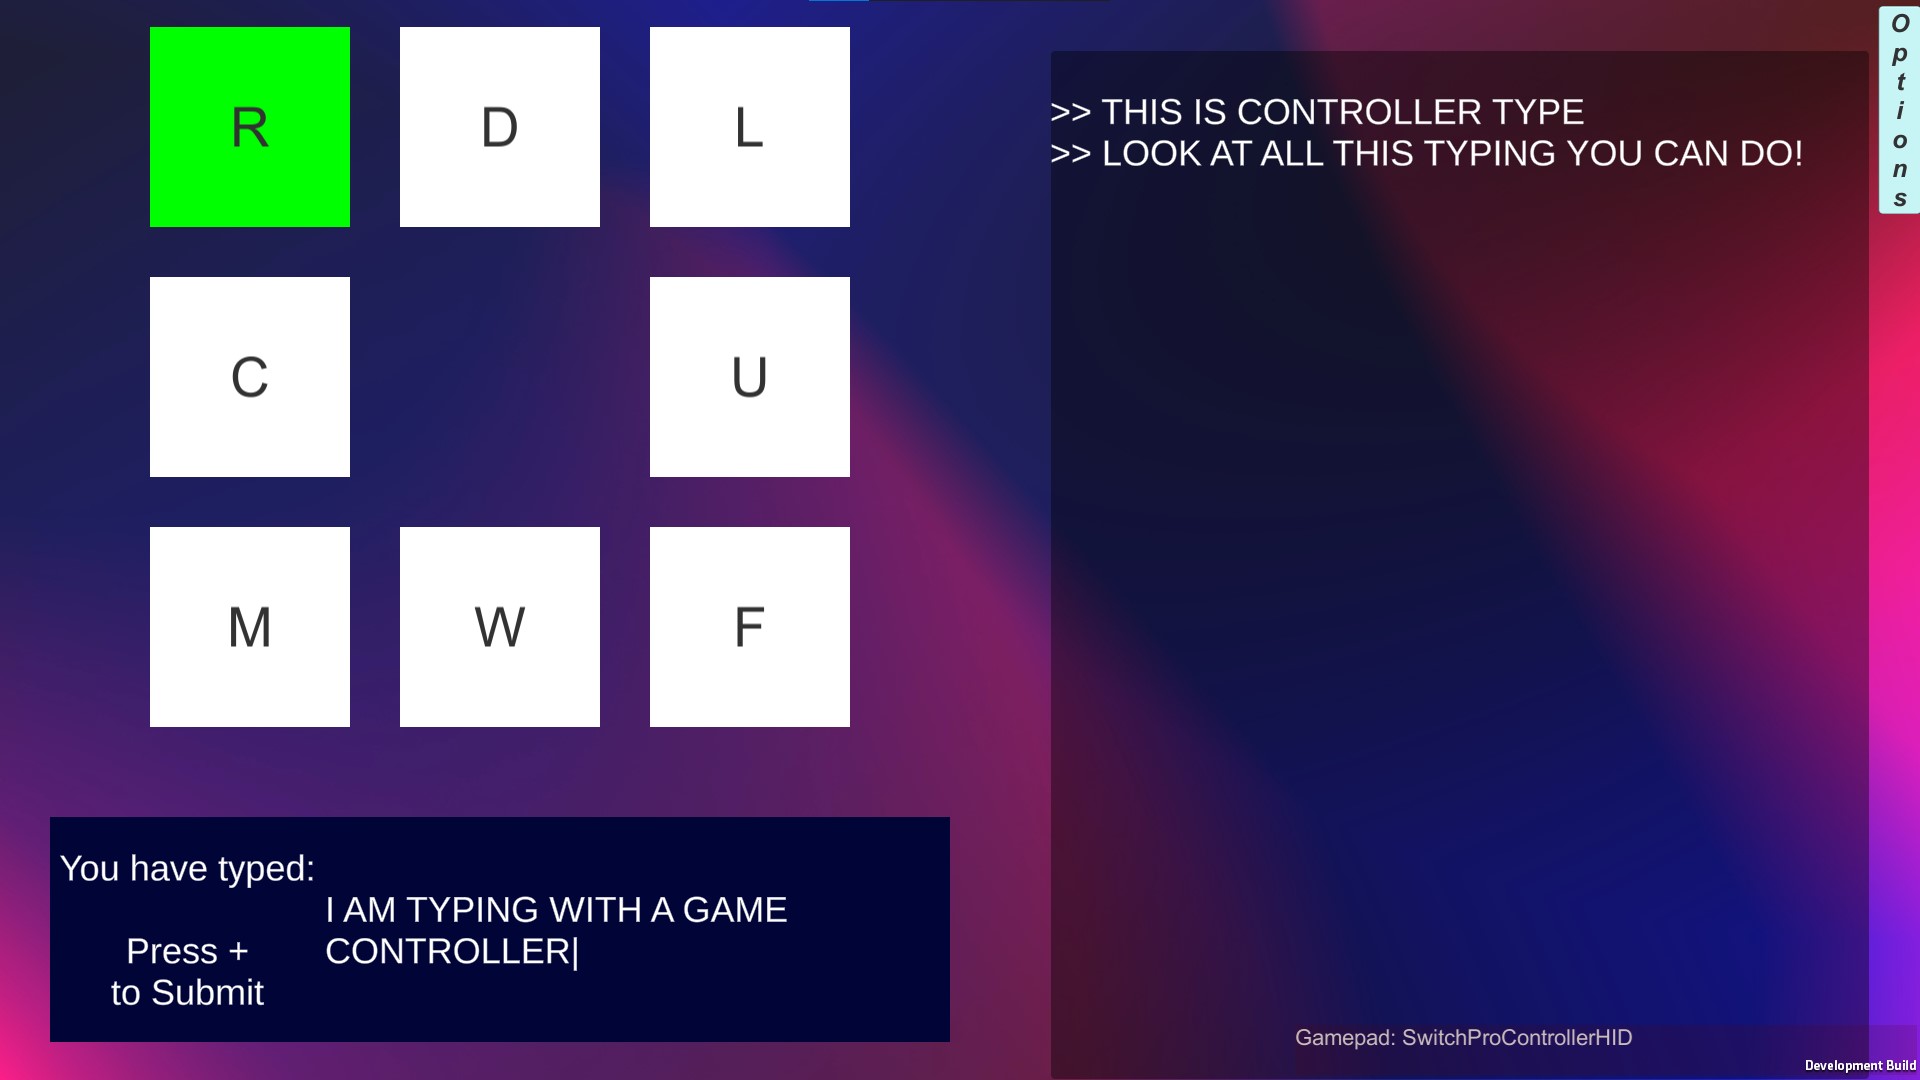 A rectangular promotional image for controller type showing the basic program design for this alternate typing controller.